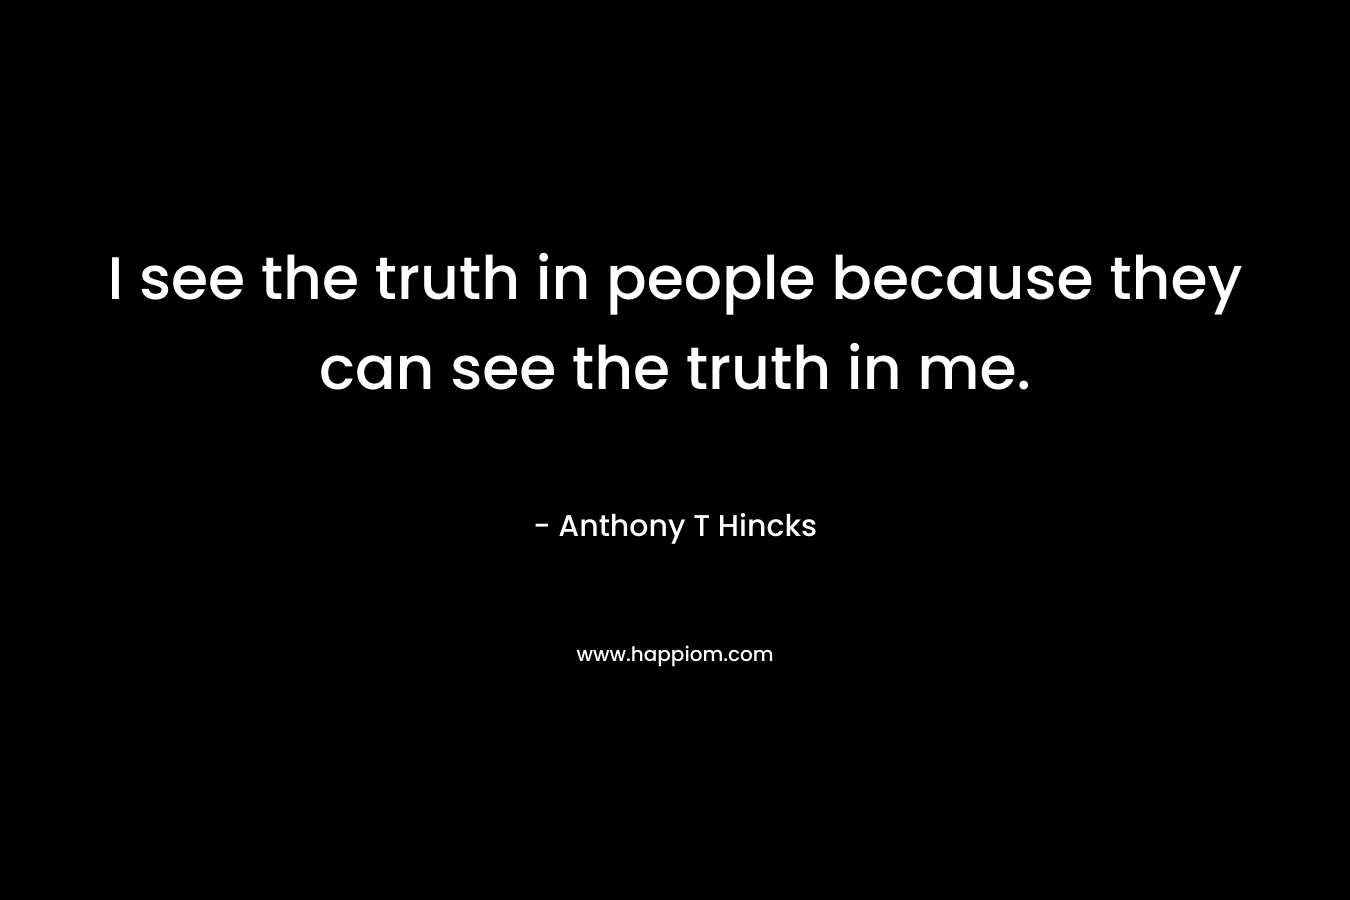 I see the truth in people because they can see the truth in me.